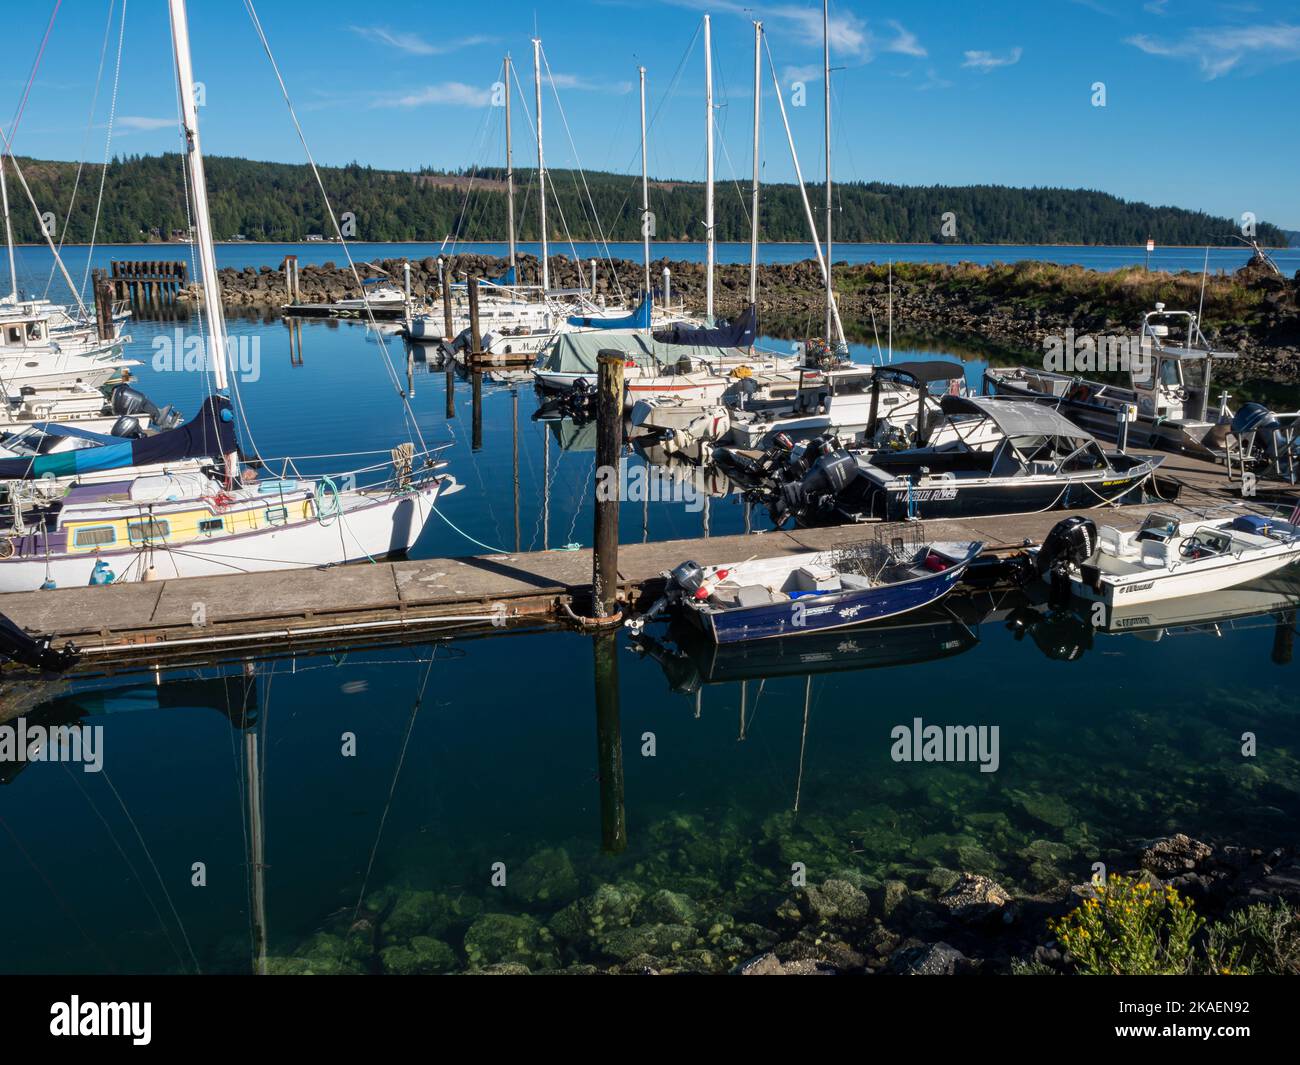 WA22658-00...WASHINGTON - Boats moored at Herb Beck Marina located off the Hood Canal on Quilcene Bay near the town of Quilcene. Stock Photo